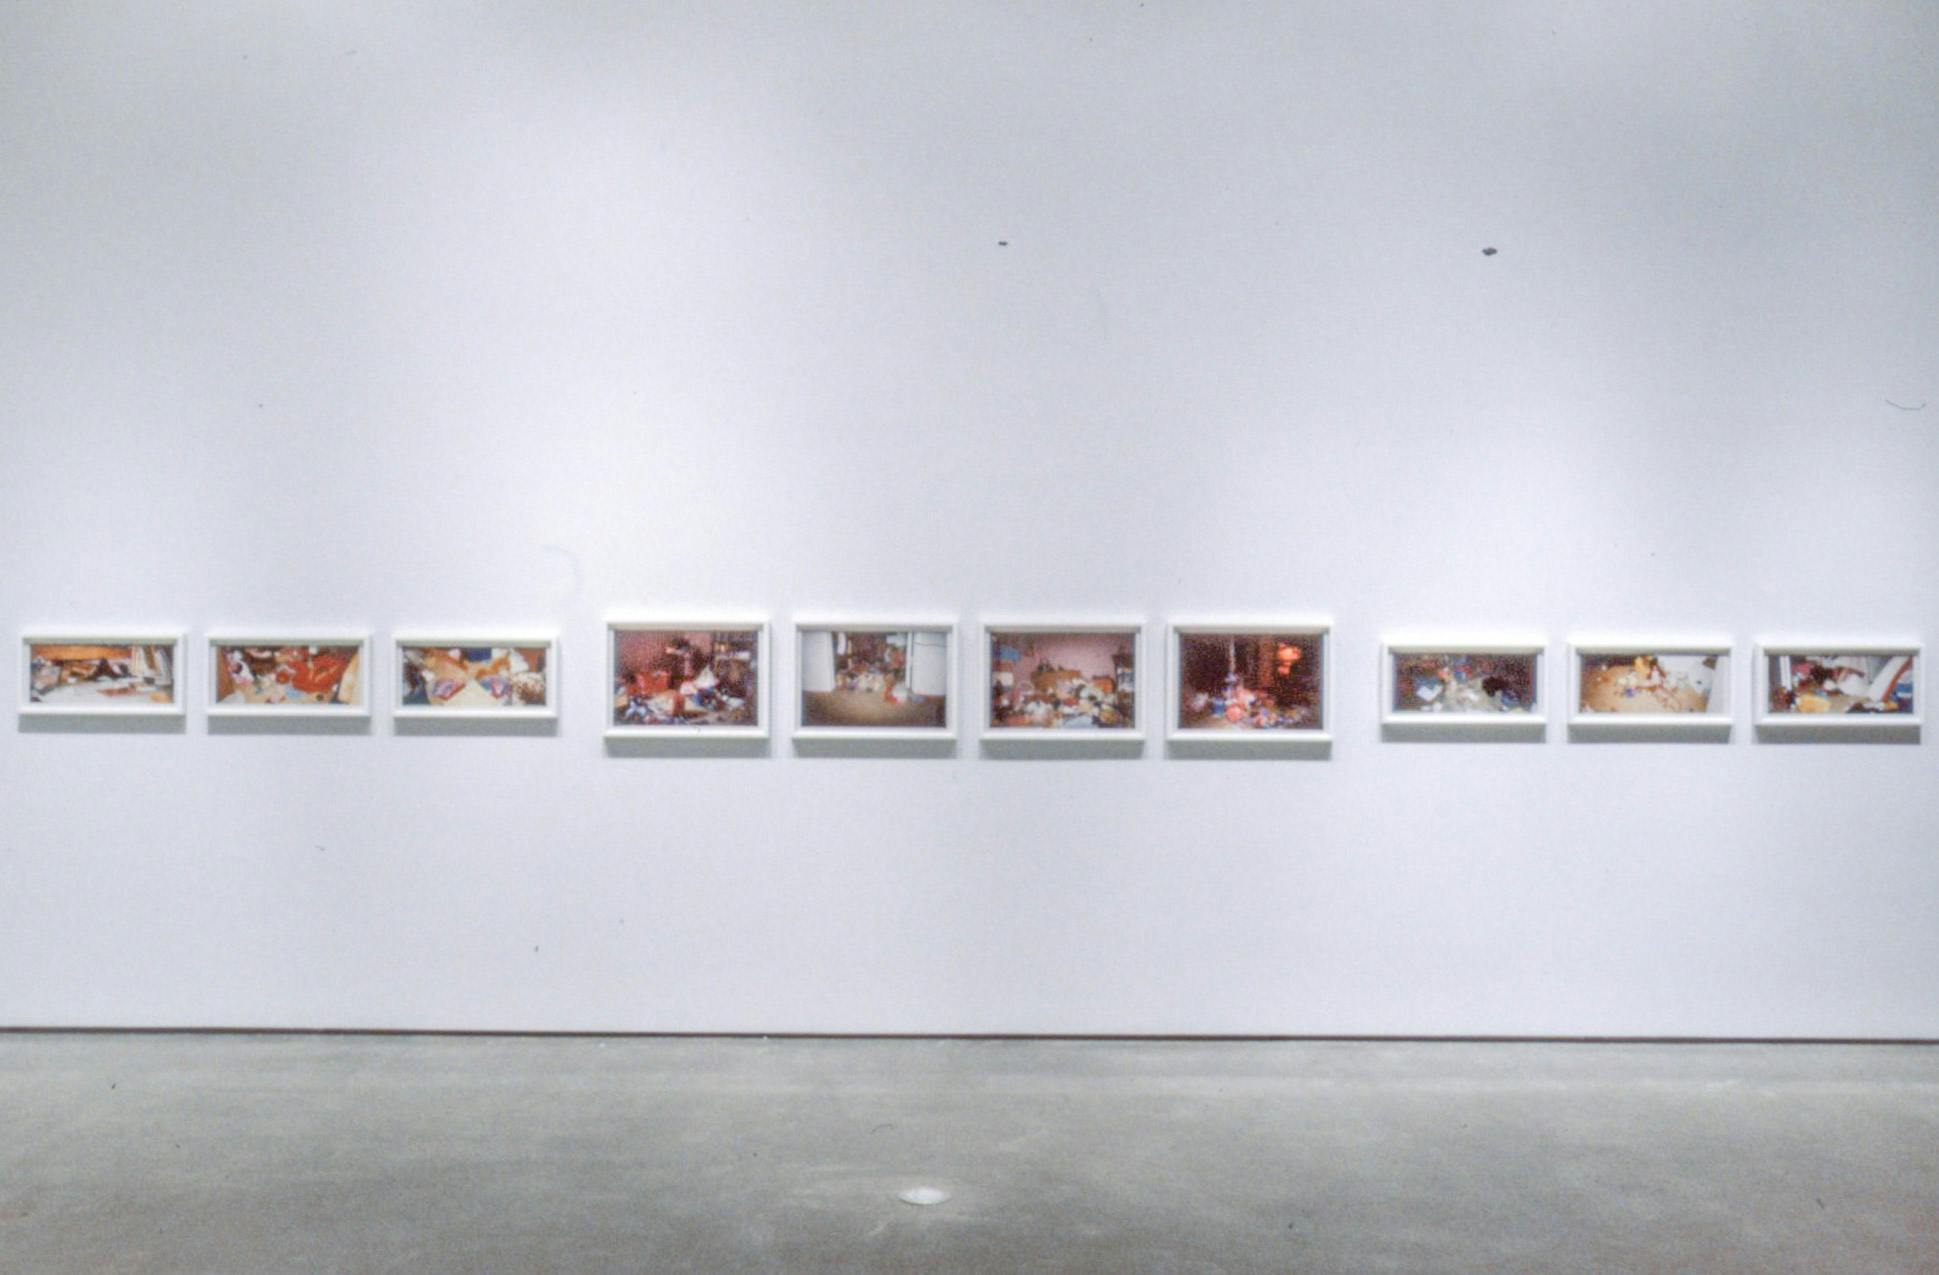 Ten coloured photographs are mounted on the gallery wall. Many of those images depict colourful objects piled up in a room. This room has a white floor and a pink wall.